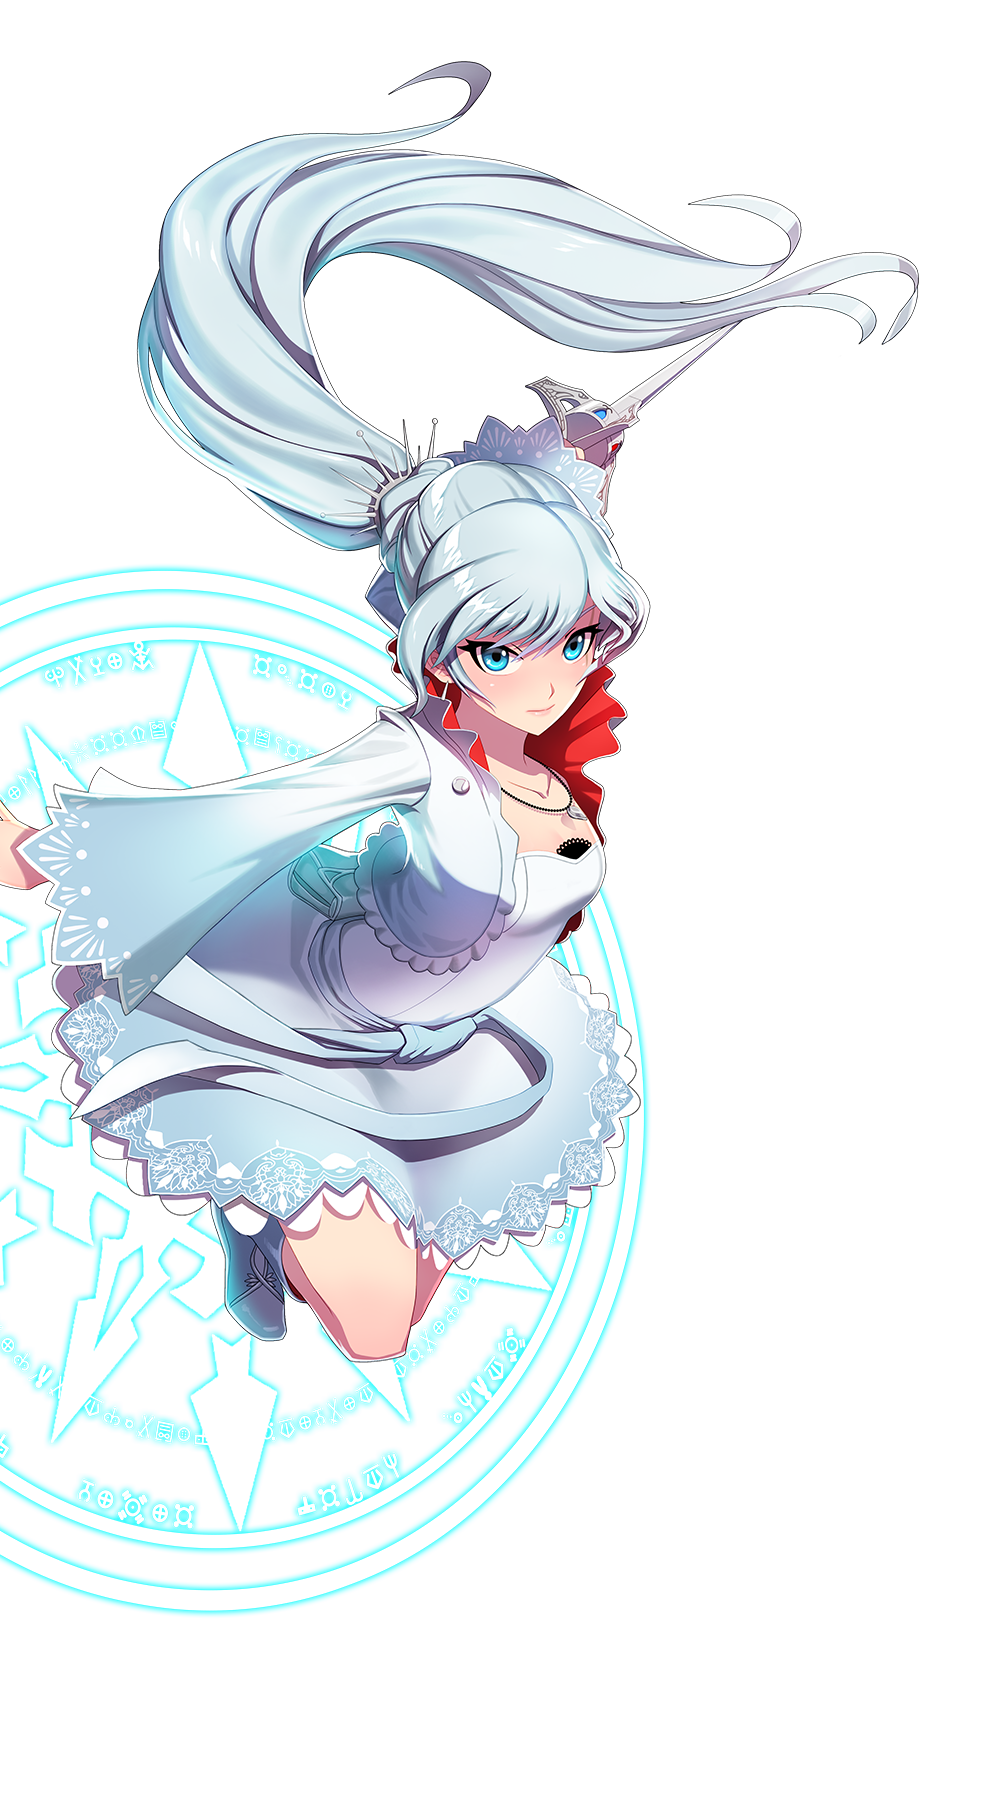 Rwby Amity Arena Weiss - HD Wallpaper 